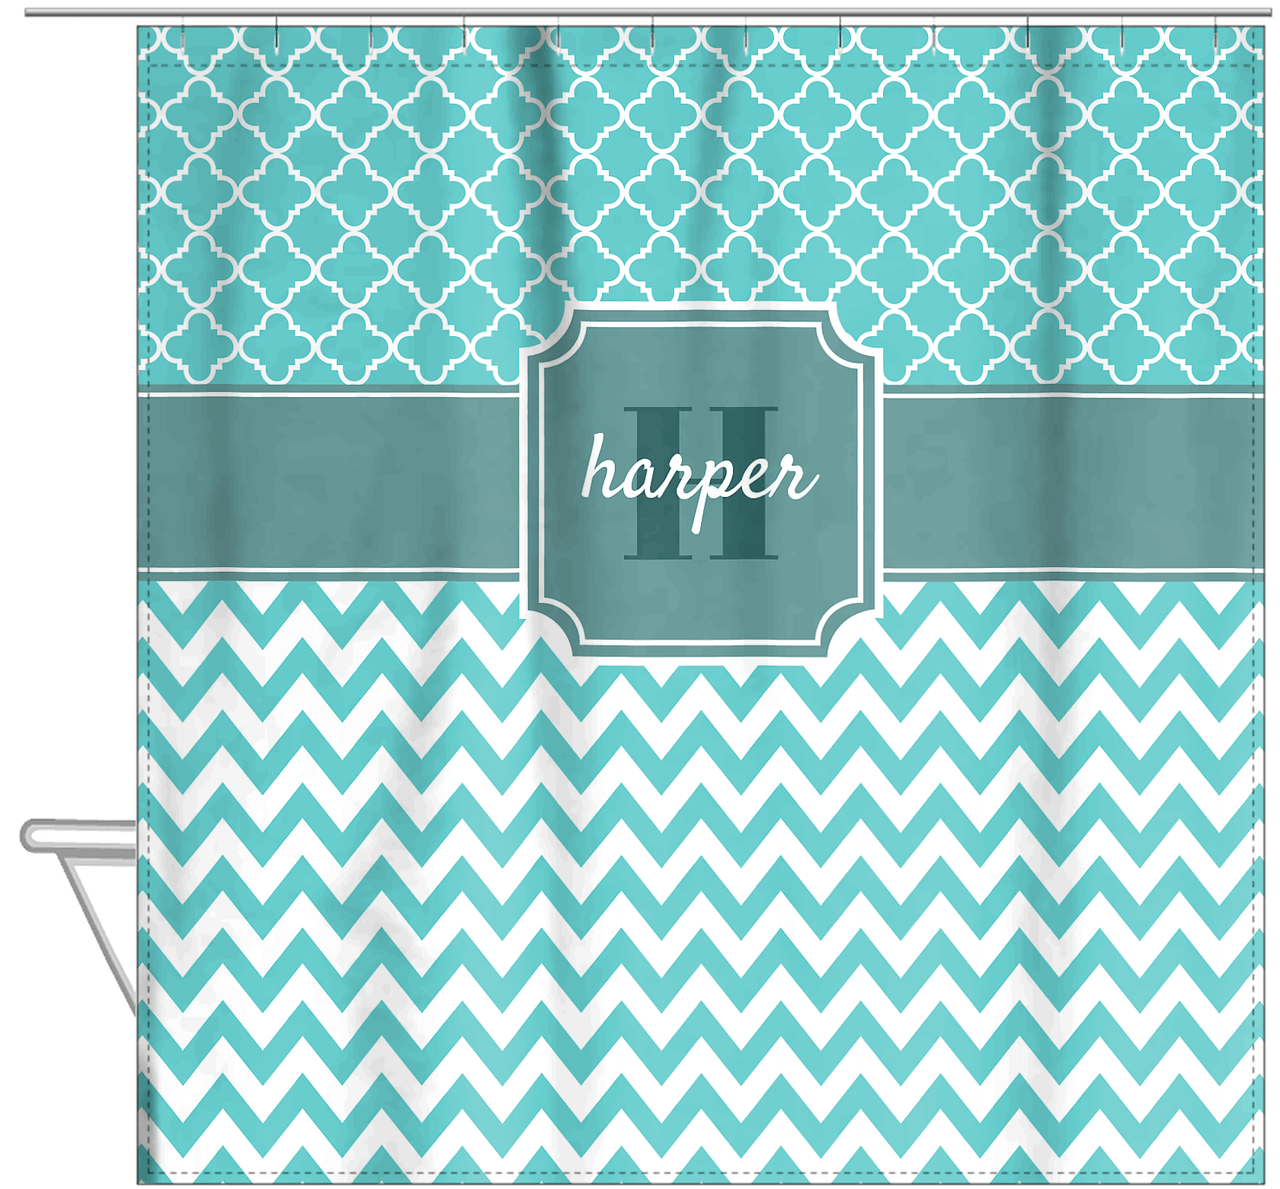 Personalized Quatrefoil and Chevron I Shower Curtain - Teal and White - Stamp Nameplate - Hanging View